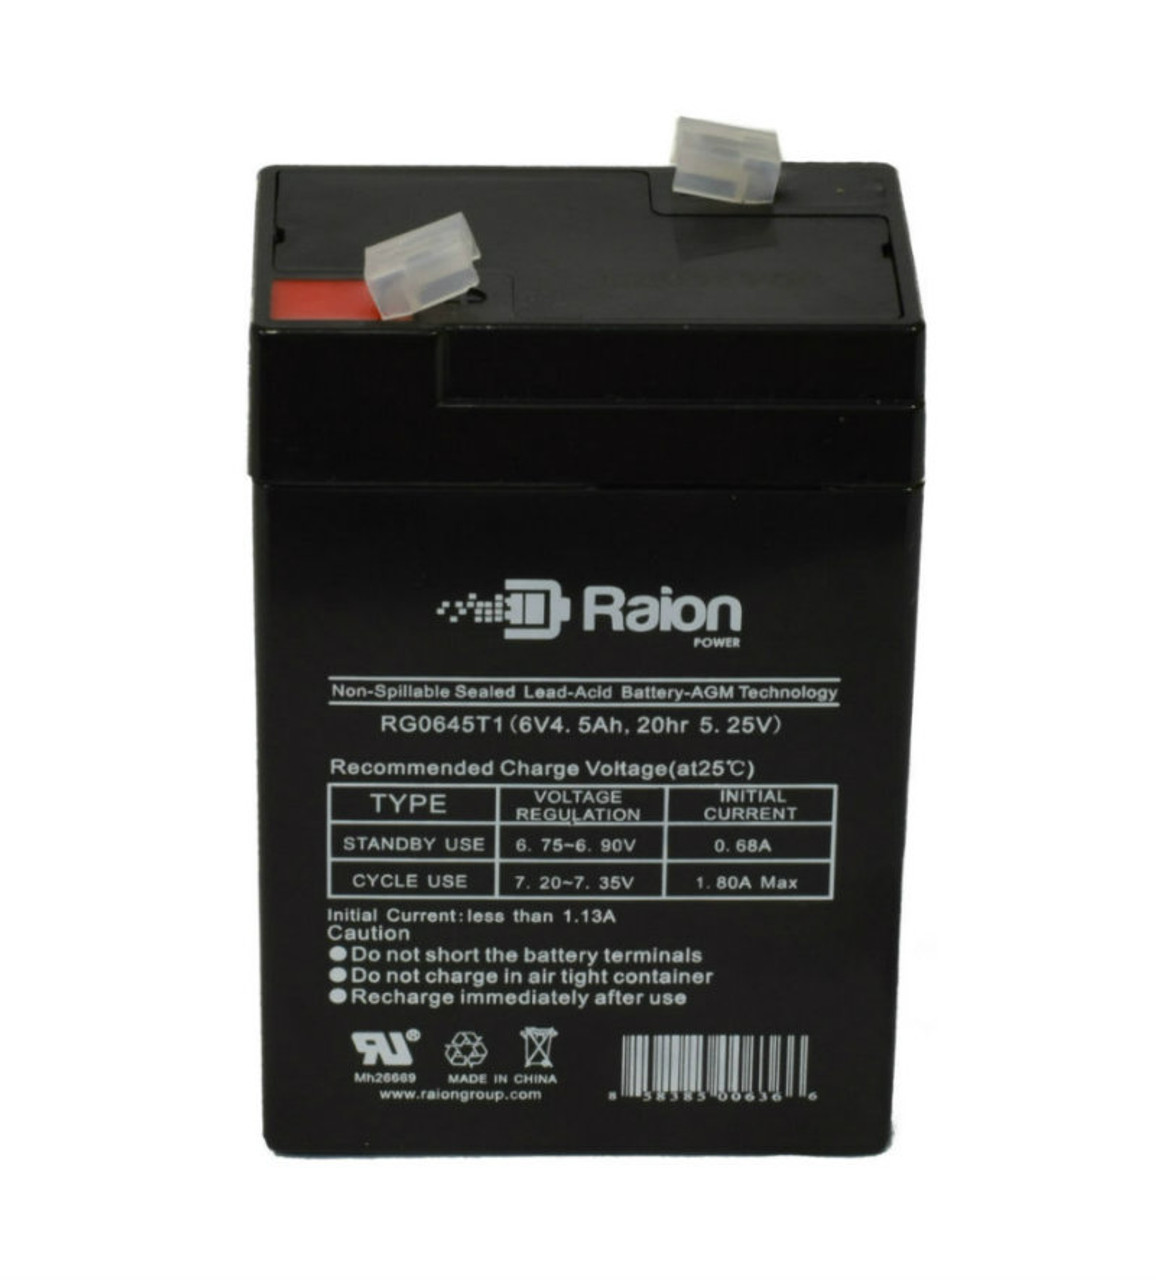 Raion Power RG0645T1 Replacement Battery Cartridge for Alaris Medical 4415 Vital Check Monitor